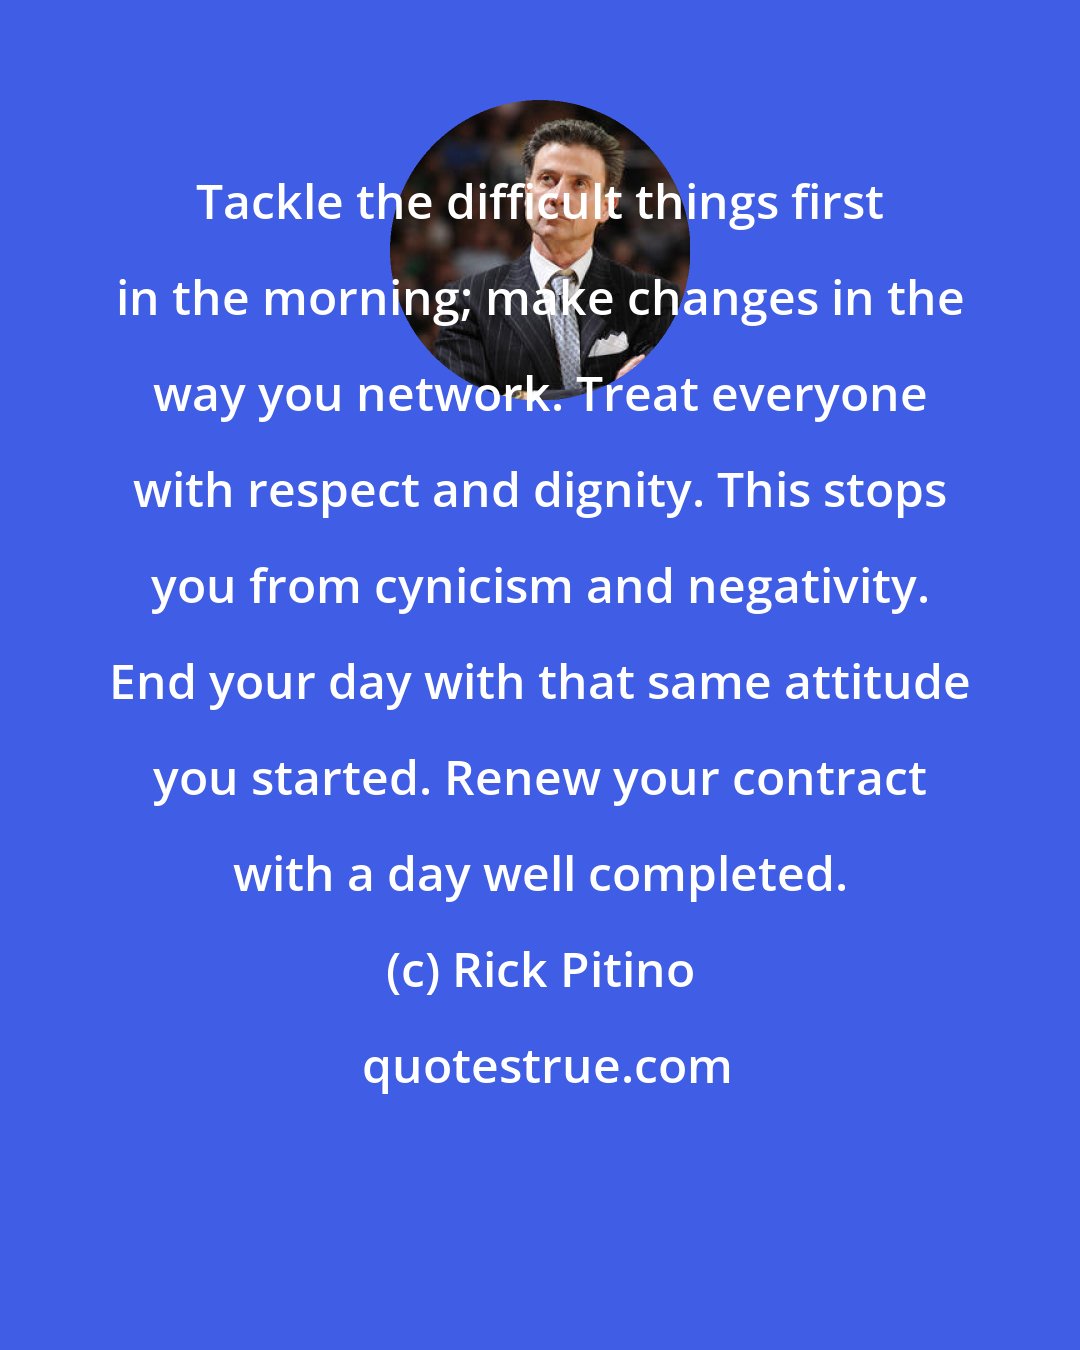 Rick Pitino: Tackle the difficult things first in the morning; make changes in the way you network. Treat everyone with respect and dignity. This stops you from cynicism and negativity. End your day with that same attitude you started. Renew your contract with a day well completed.